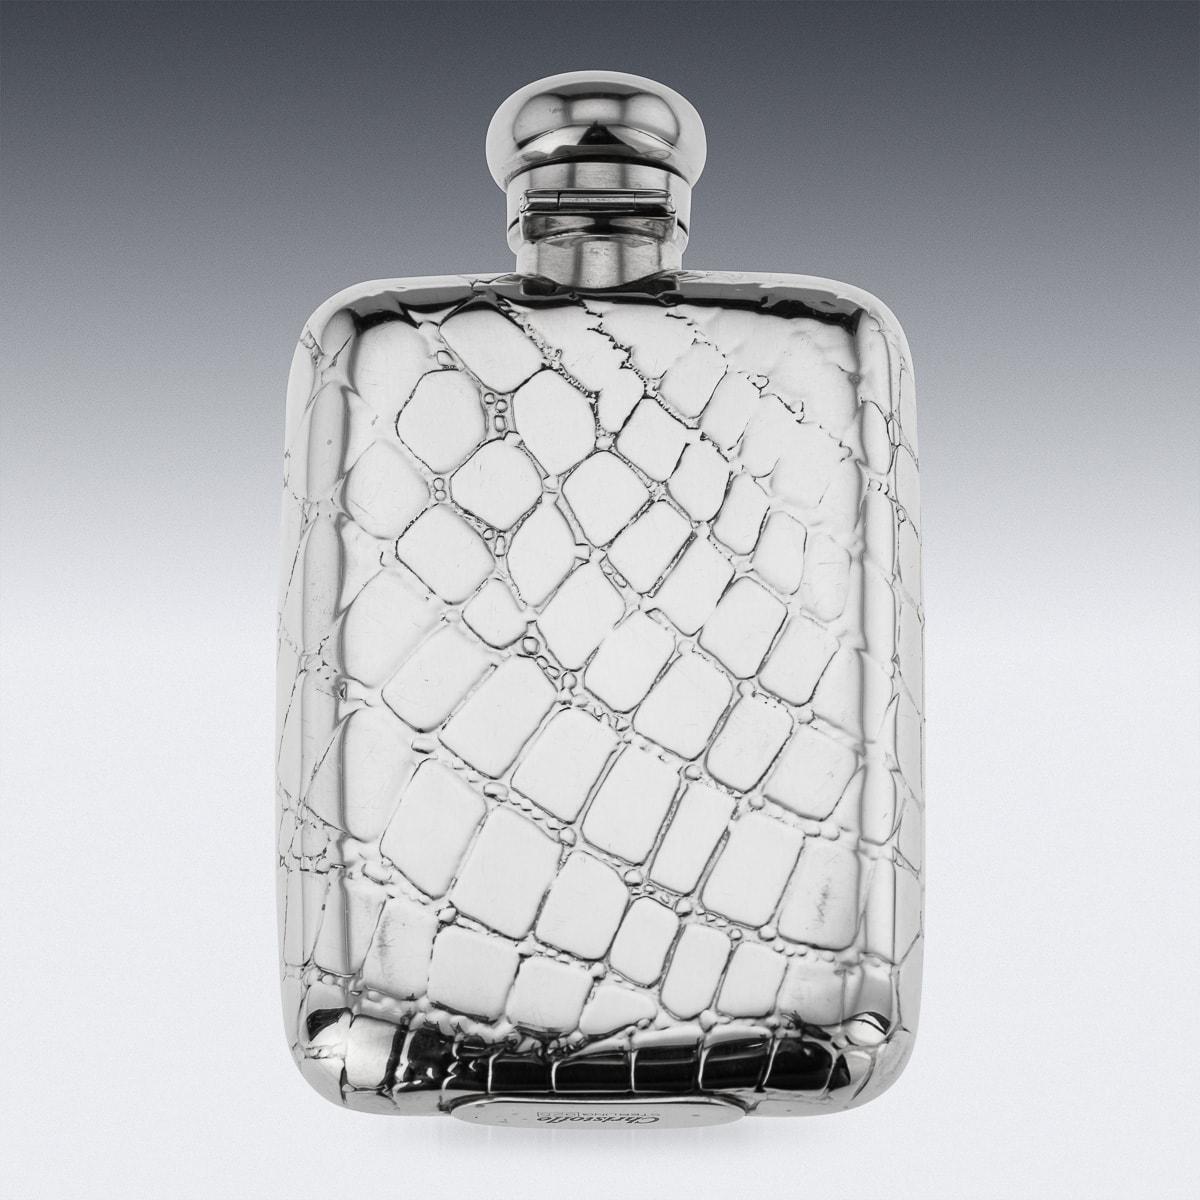 A superb 20th Century solid silver hip flask with silver hinged top. This flask has an outer design of a crocodile skin. Hallmarked sterling silver (925 standard), Paris, circa 1980, Makers mark Christofle.

CONDITION
In Great condition - No damage,